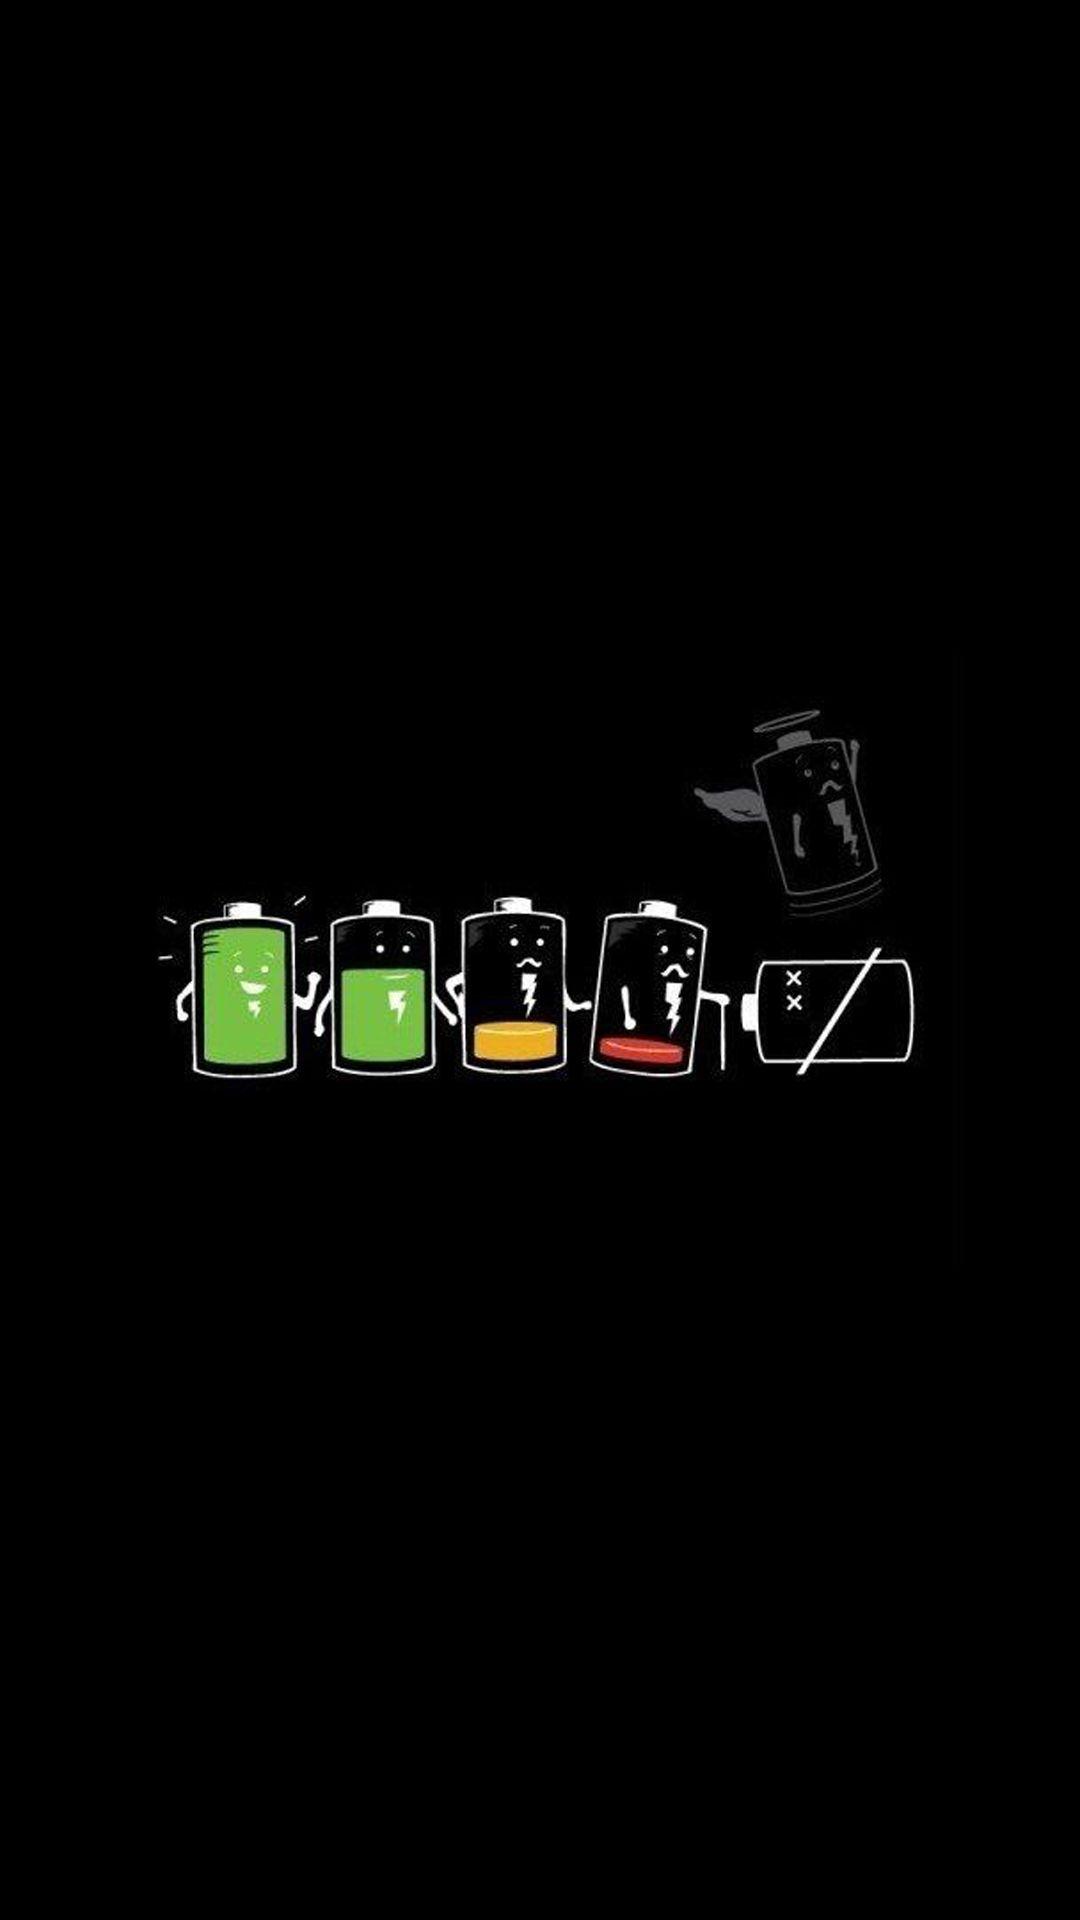 The Battery Life. Funny cartoon art iPhone wallpaper. Tap to see